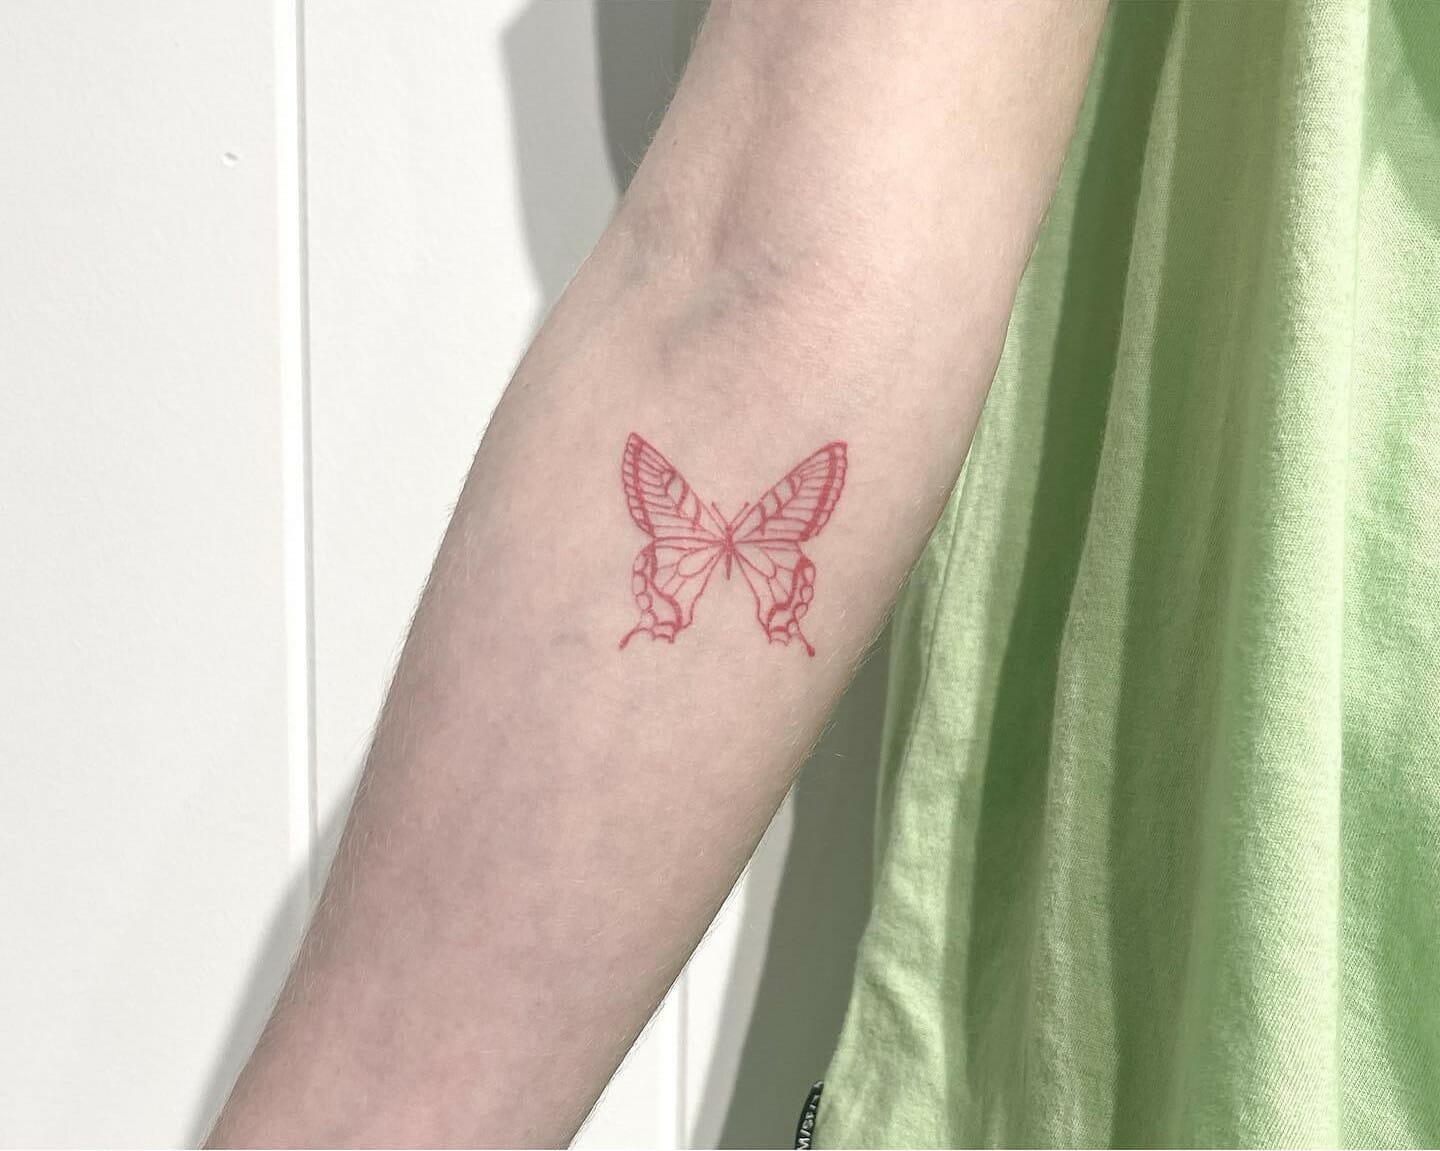 Tattoo inspo  Butterfly   Gallery posted by Flossy CD  Lemon8